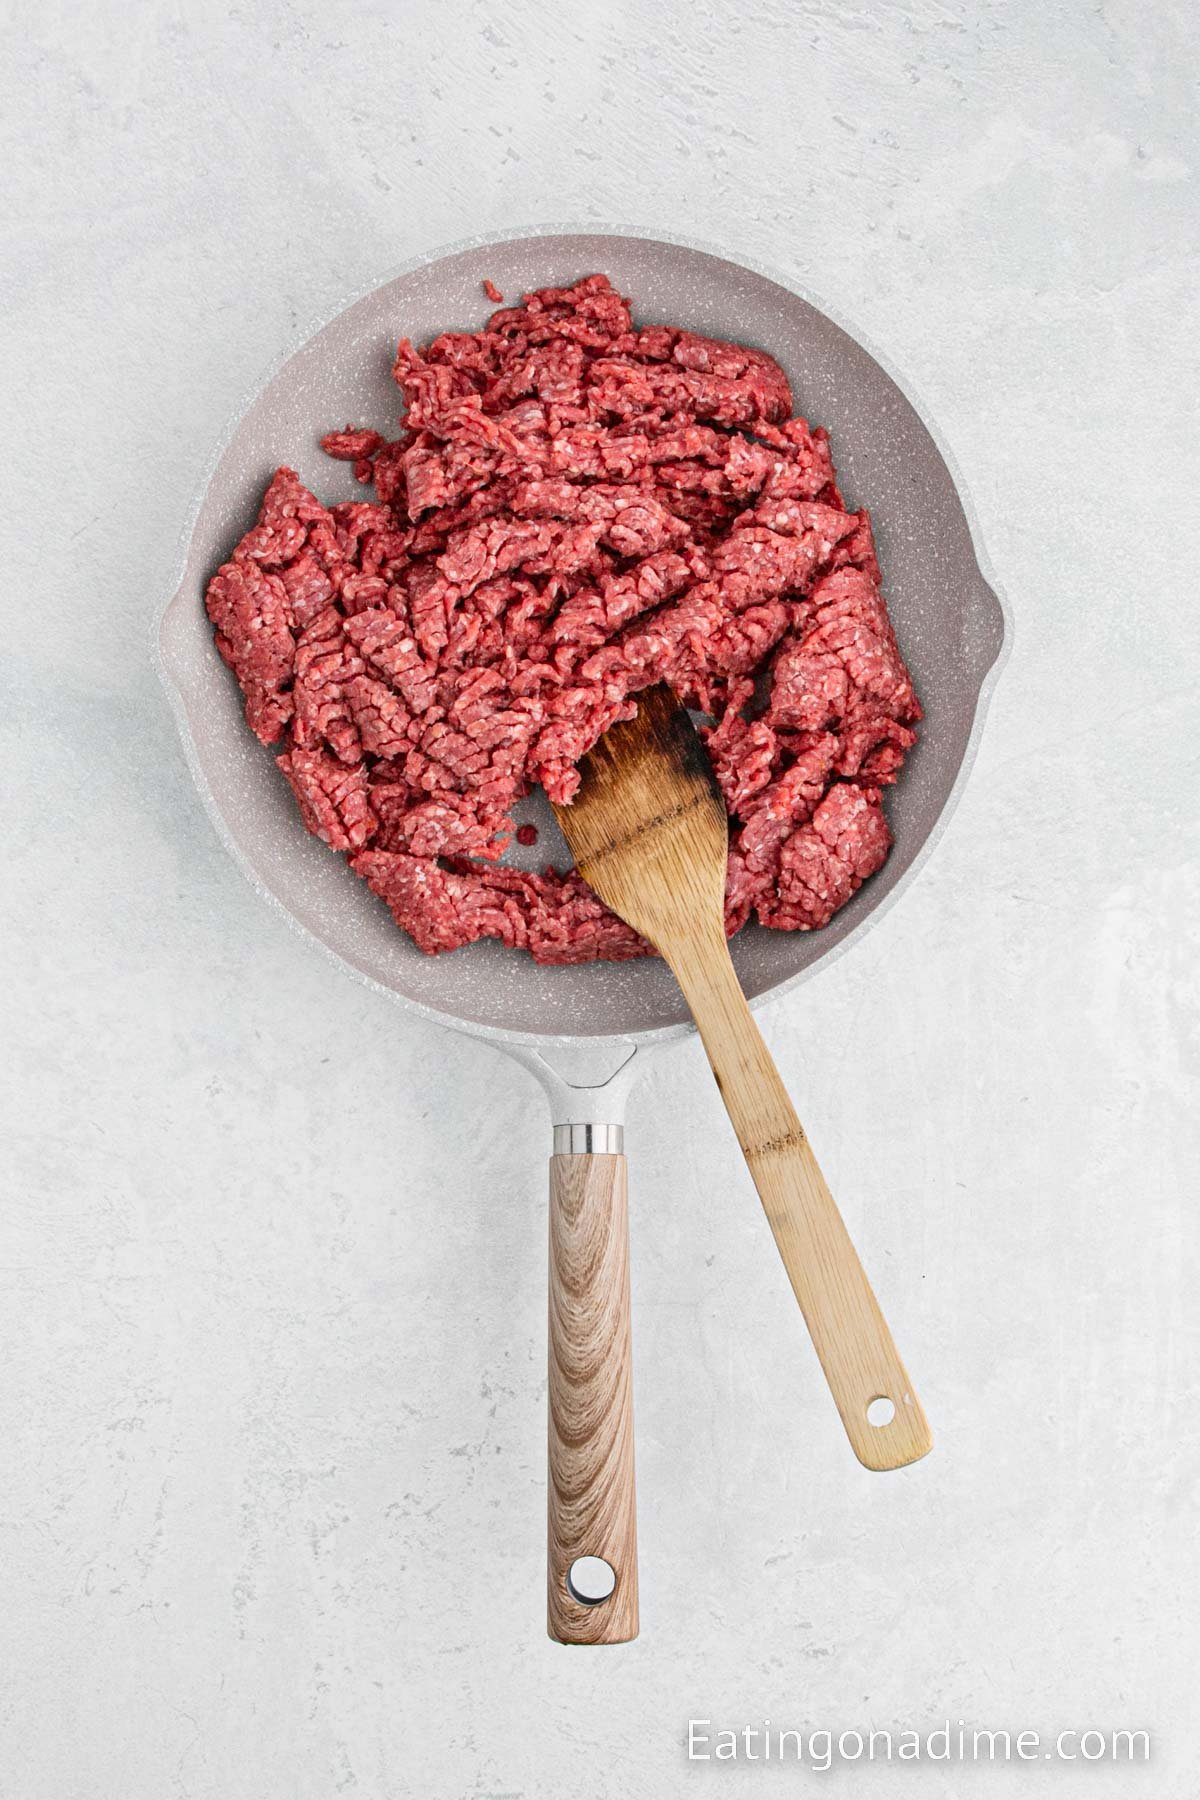 Cooking the ground beef in a skillet with a wooden spoon